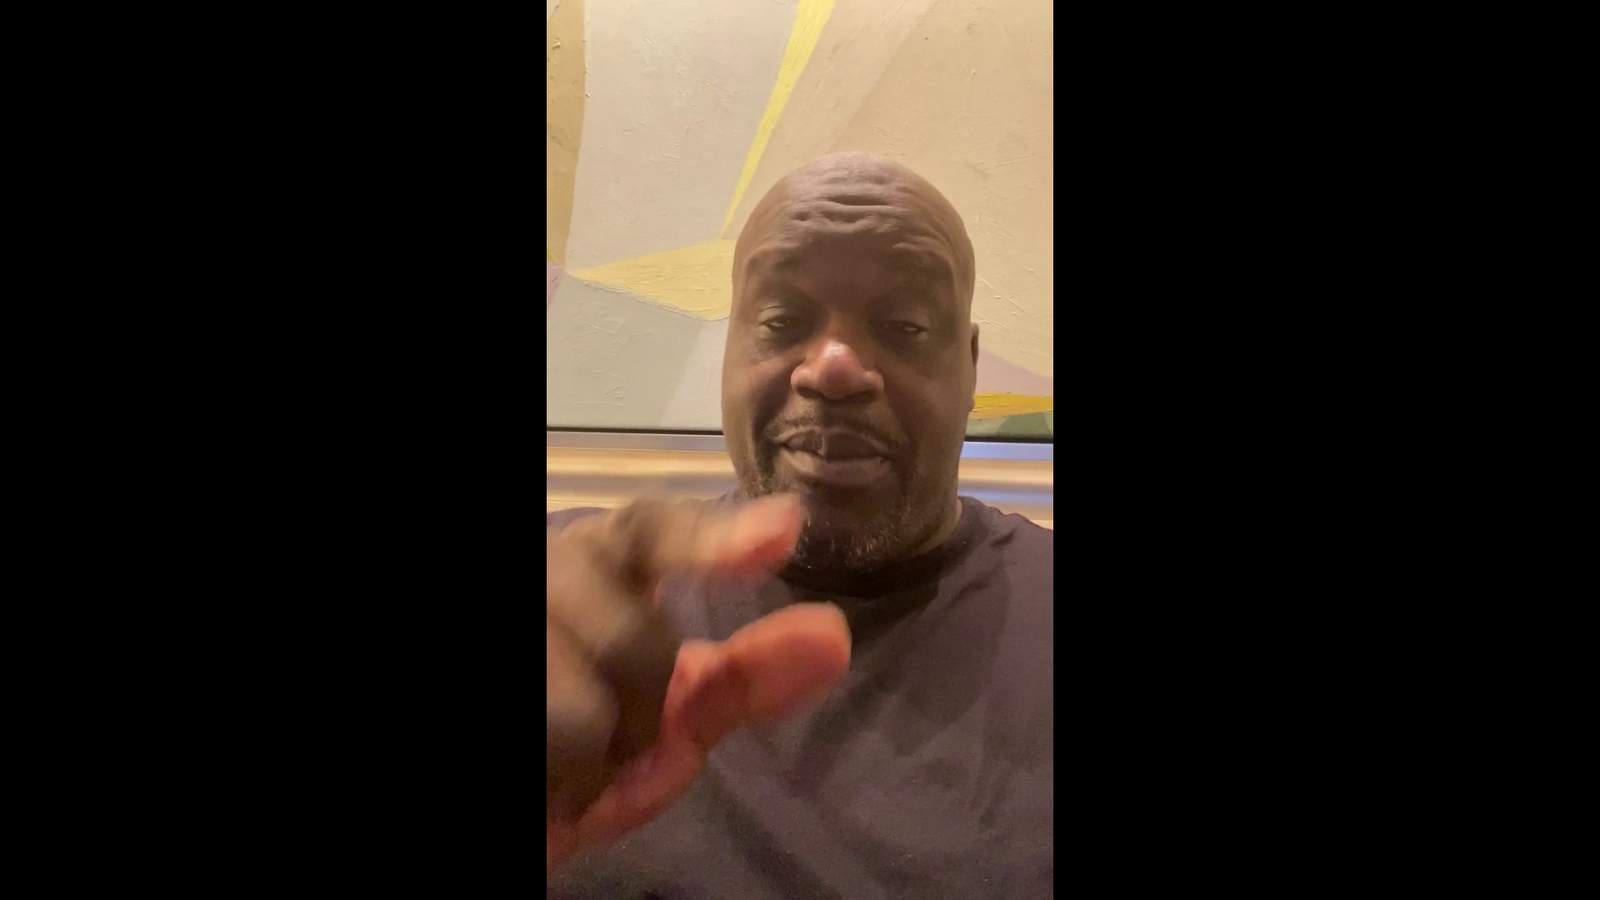 Shaquille O’Neal helps feed Jacksonville families in need